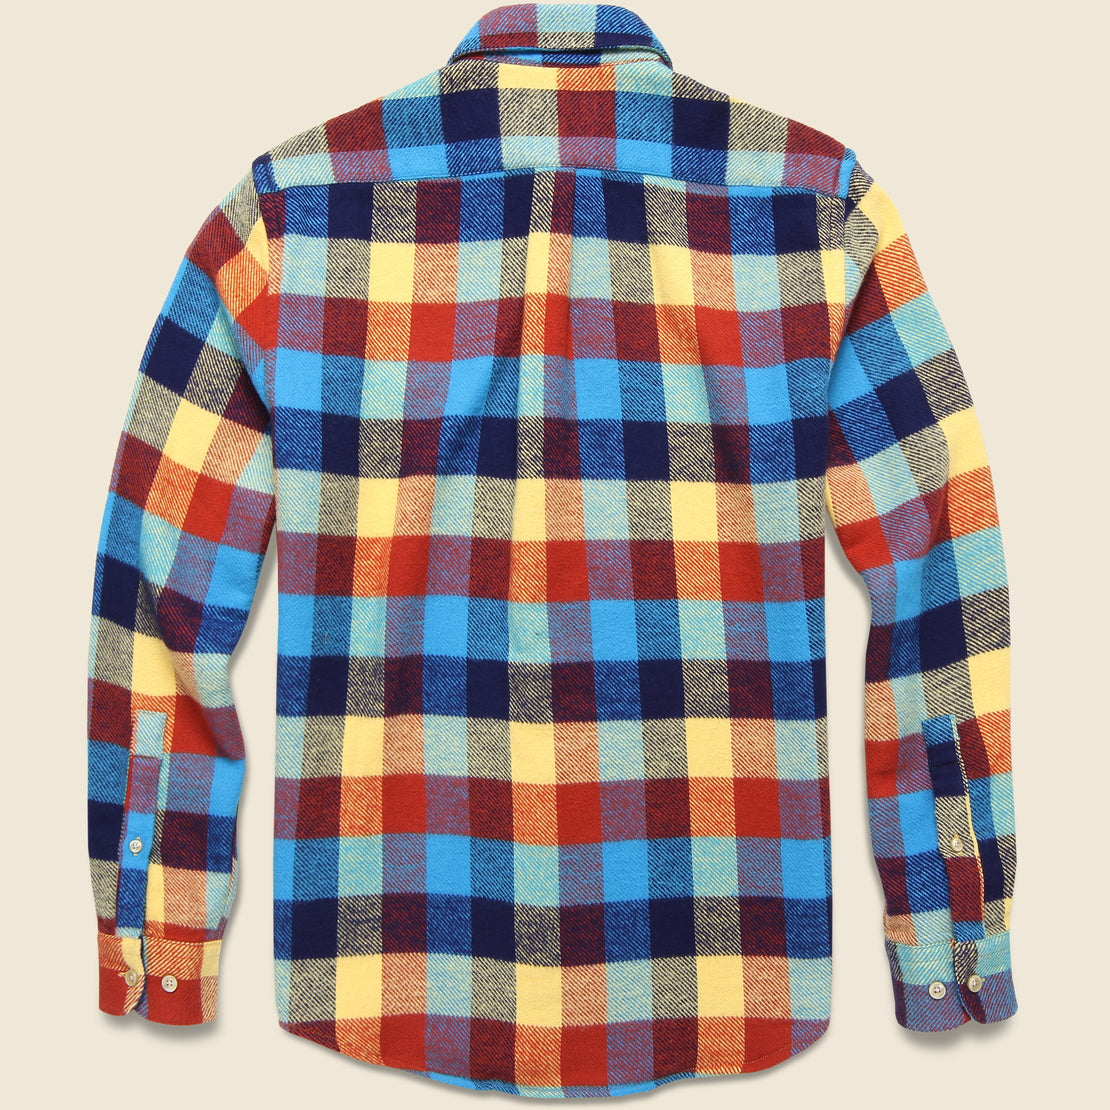 Performance Check Shirt - Multi - Portuguese Flannel - STAG Provisions - Tops - L/S Woven - Plaid